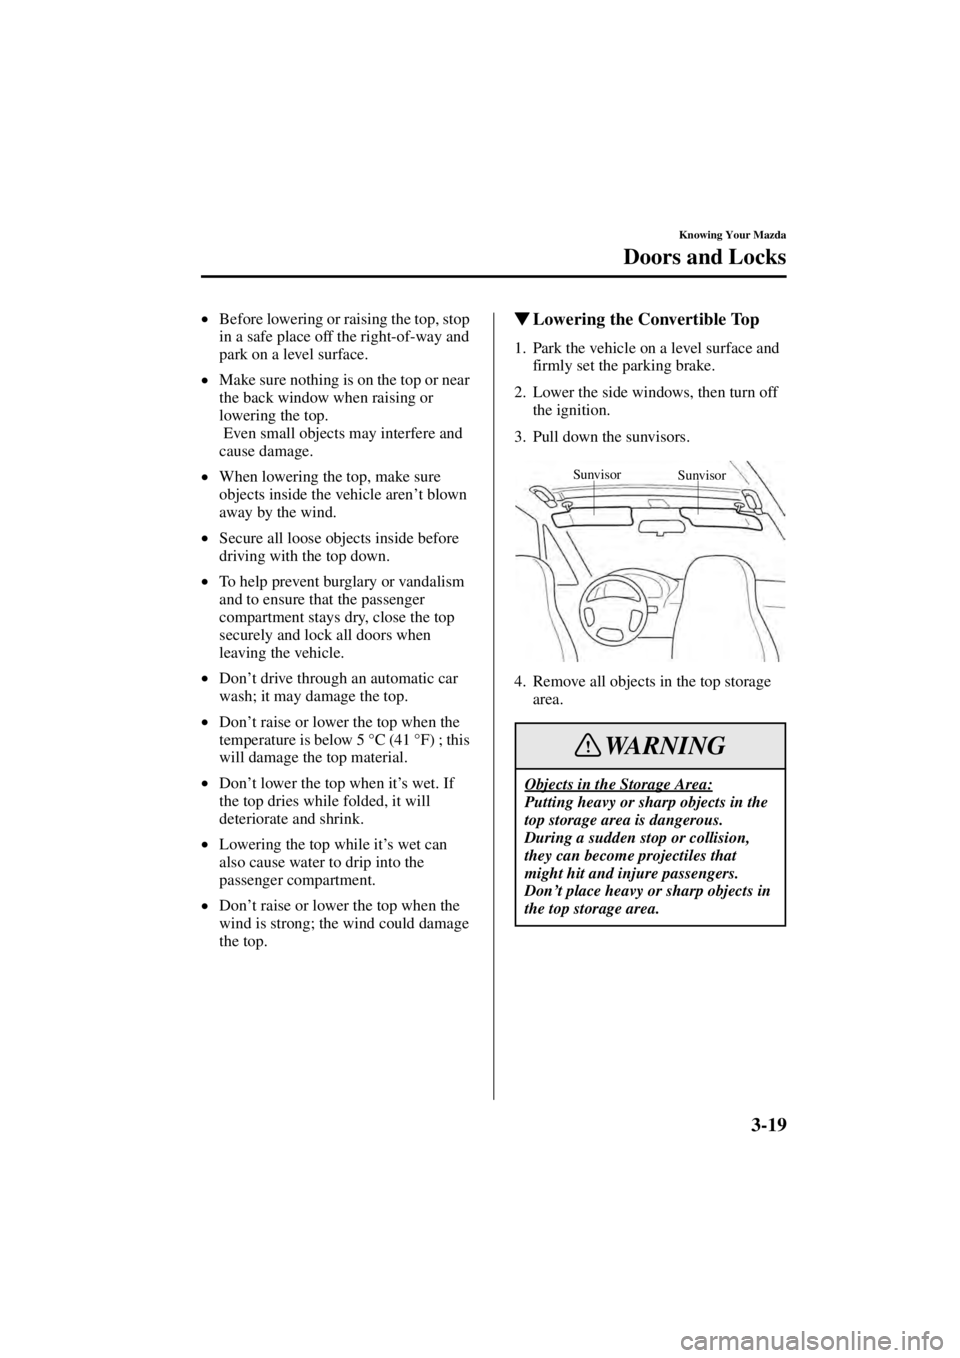 MAZDA MODEL SPEED MX-5 MIATA 2004  Owners Manual 3-19
Knowing Your Mazda
Doors and Locks
Form No. 8T02-EA-03L
•Before lowering or raising the top, stop 
in a safe place off the right-of-way and 
park on a level surface.
• Make sure nothing is on